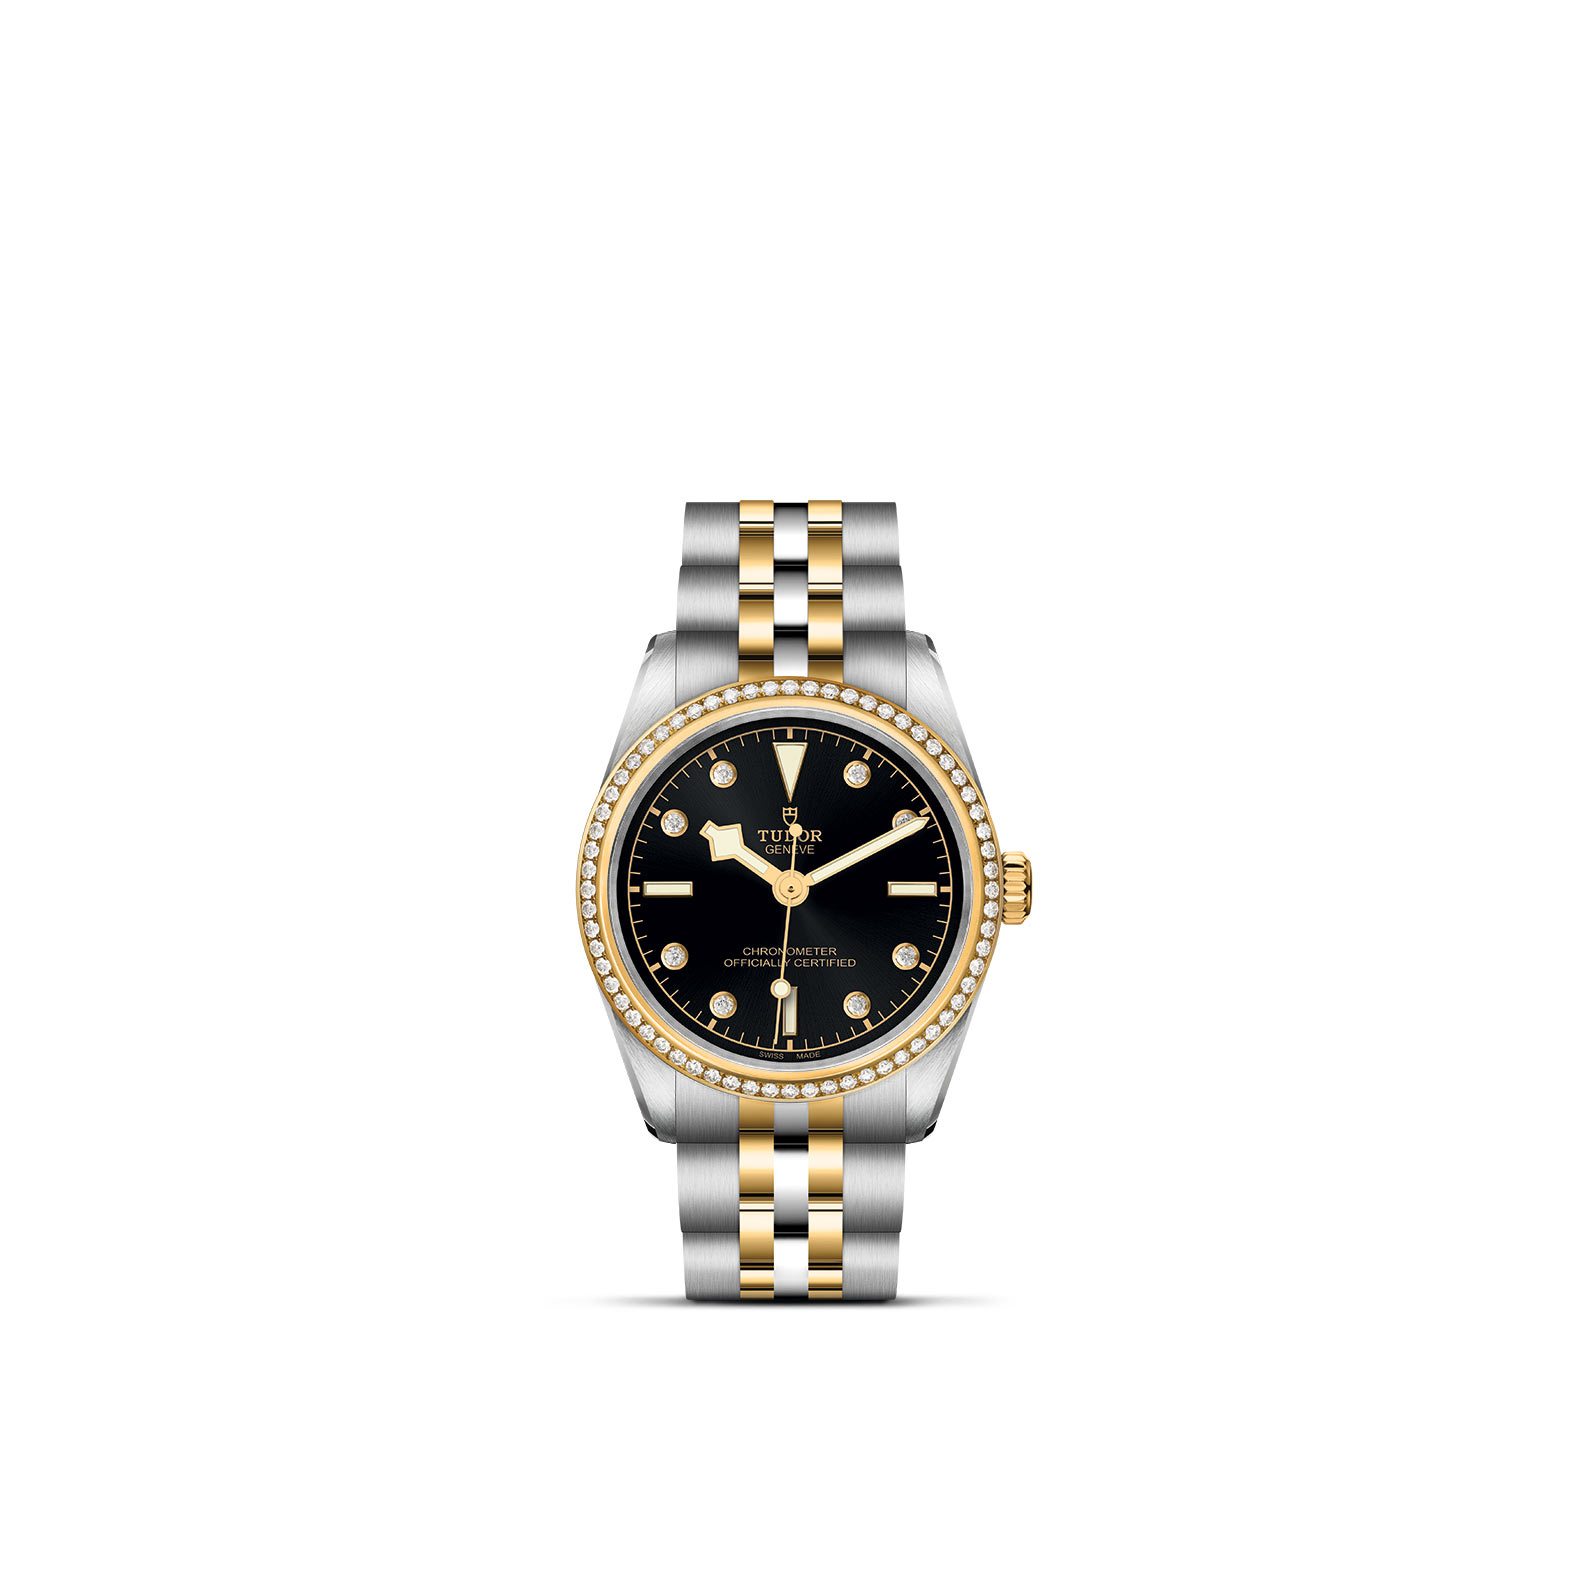 TUDOR BLACK BAY 31/36/39/41 standing upright, highlighting its classic design against a white background.